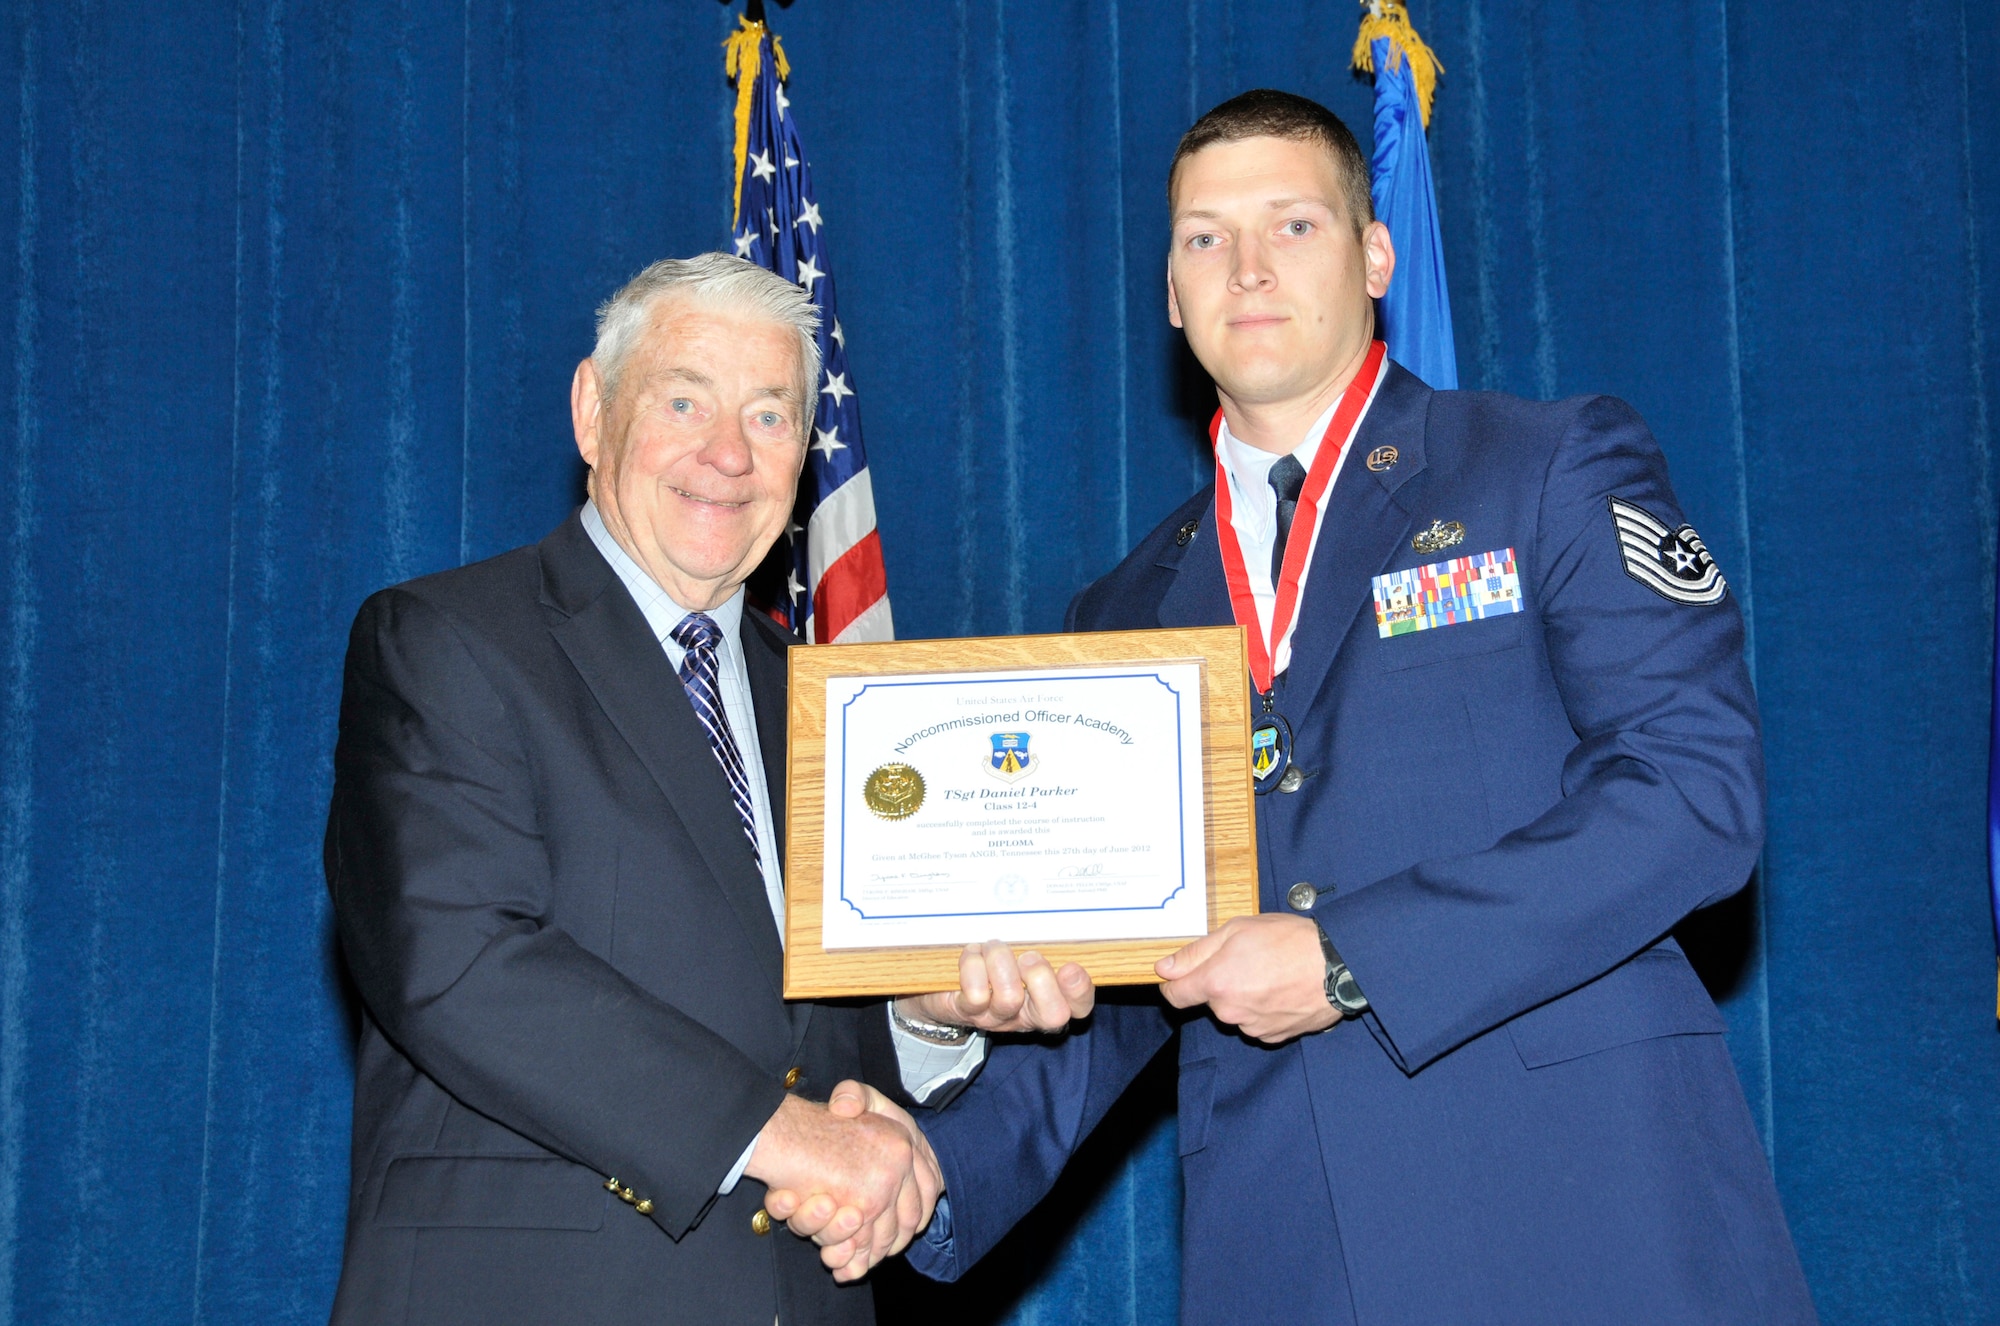 McGHEE TYSON AIR NATIONAL GUARD BASE, Tenn. - Tech. Sgt. Daniel Parker, right, receives the distinguished graduate award for Satellite NCO Academy Class 12-4 at The I.G. Brown Training and Education Center here from retired Chief Master Sgt. of the Air Force Robert Gaylor, June 27, 2012.  The distinguished graduate award is presented to students in the top ten percent of the class.  It is based on objective and performance evaluations, demonstrated leadership, and performance as a team player. (National Guard photo by Master Sgt. Kurt Skoglund/Released)